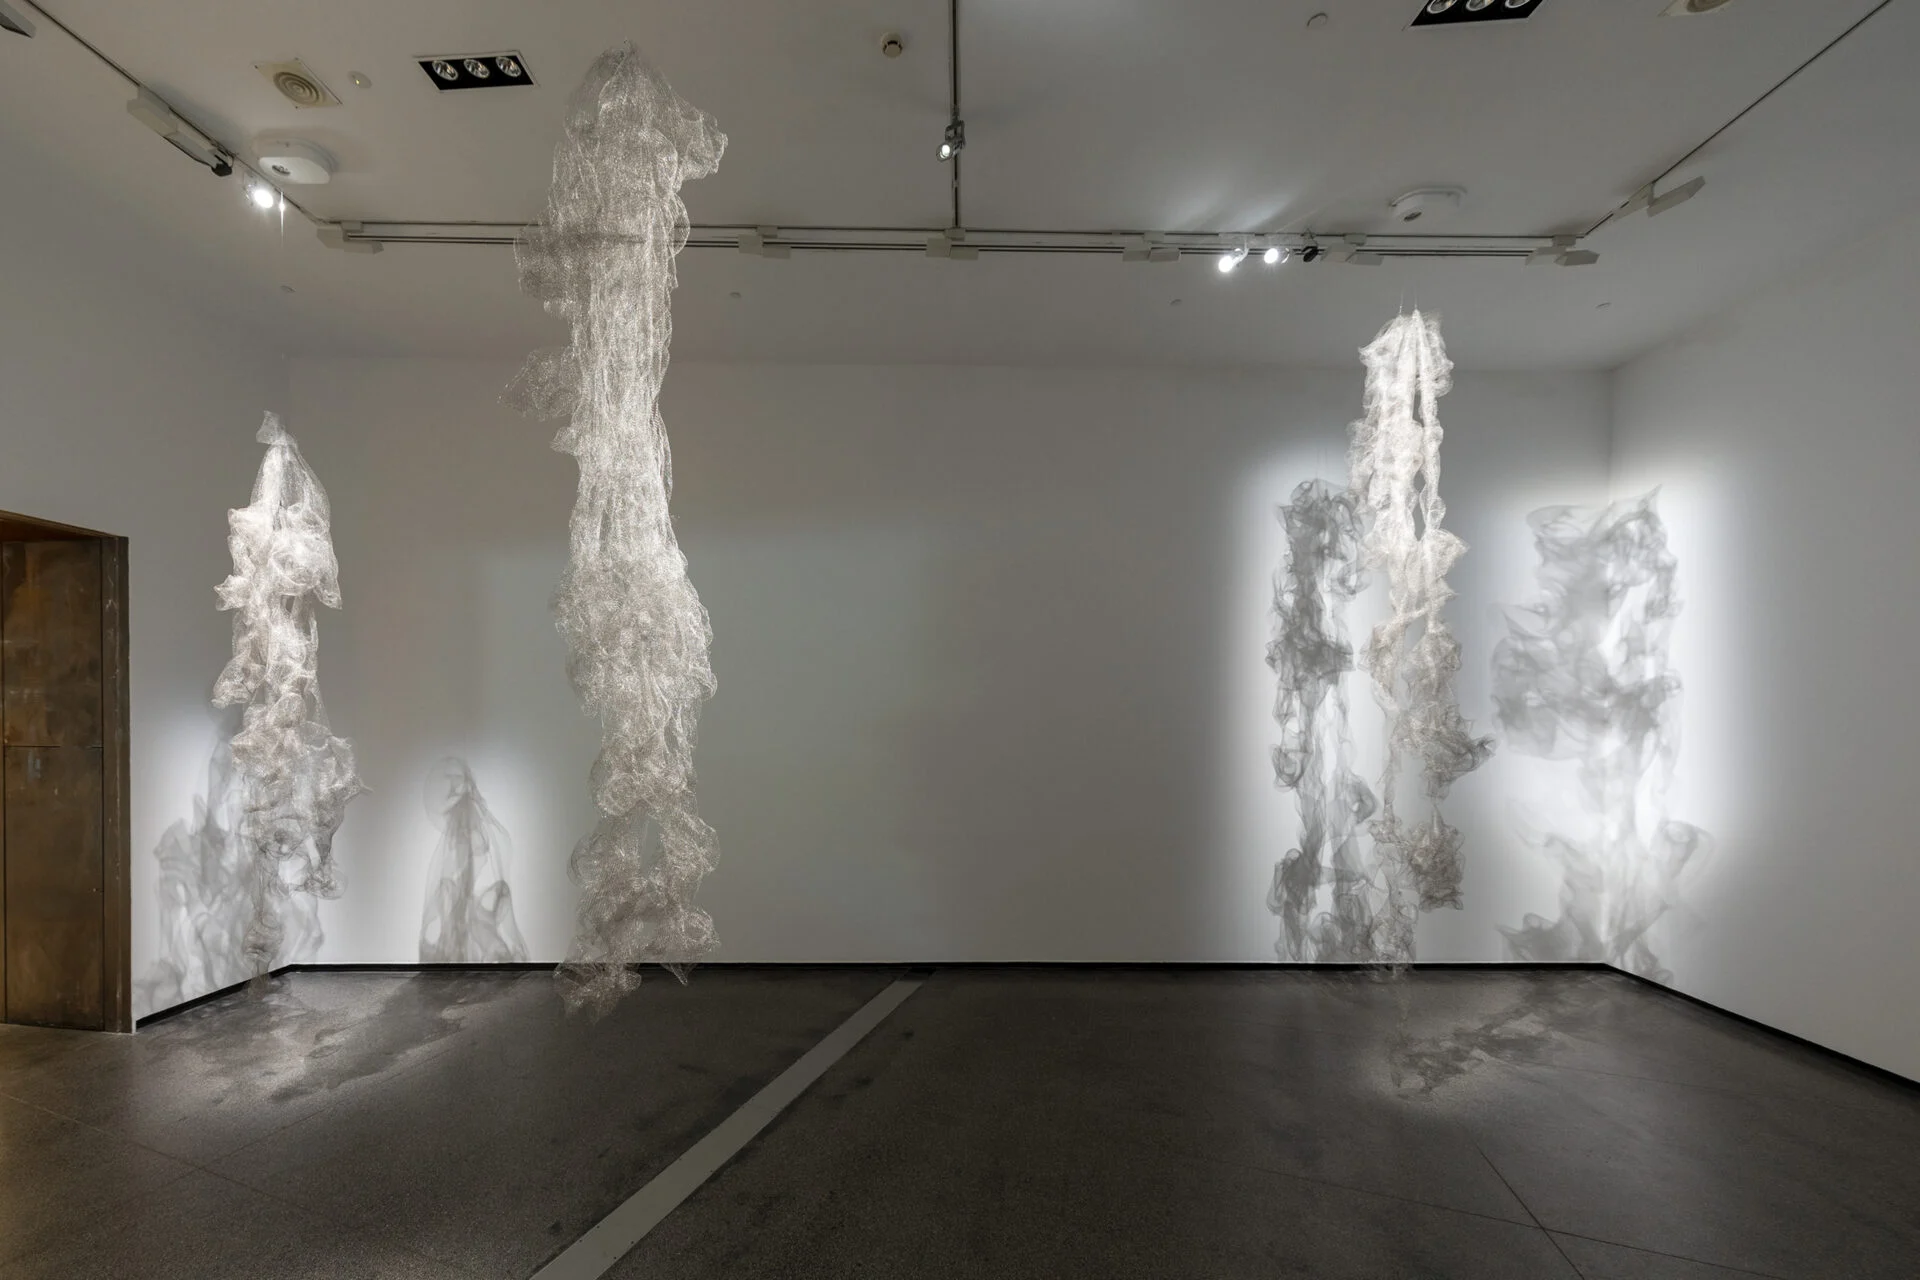 Image Description: Three wire mesh forms hang from the ceiling. The gallery setting features white walls, a lighting track on the ceiling and a grey tiled floor. The cool lighting casts shadows of the mesh forms onto the walls and floor.